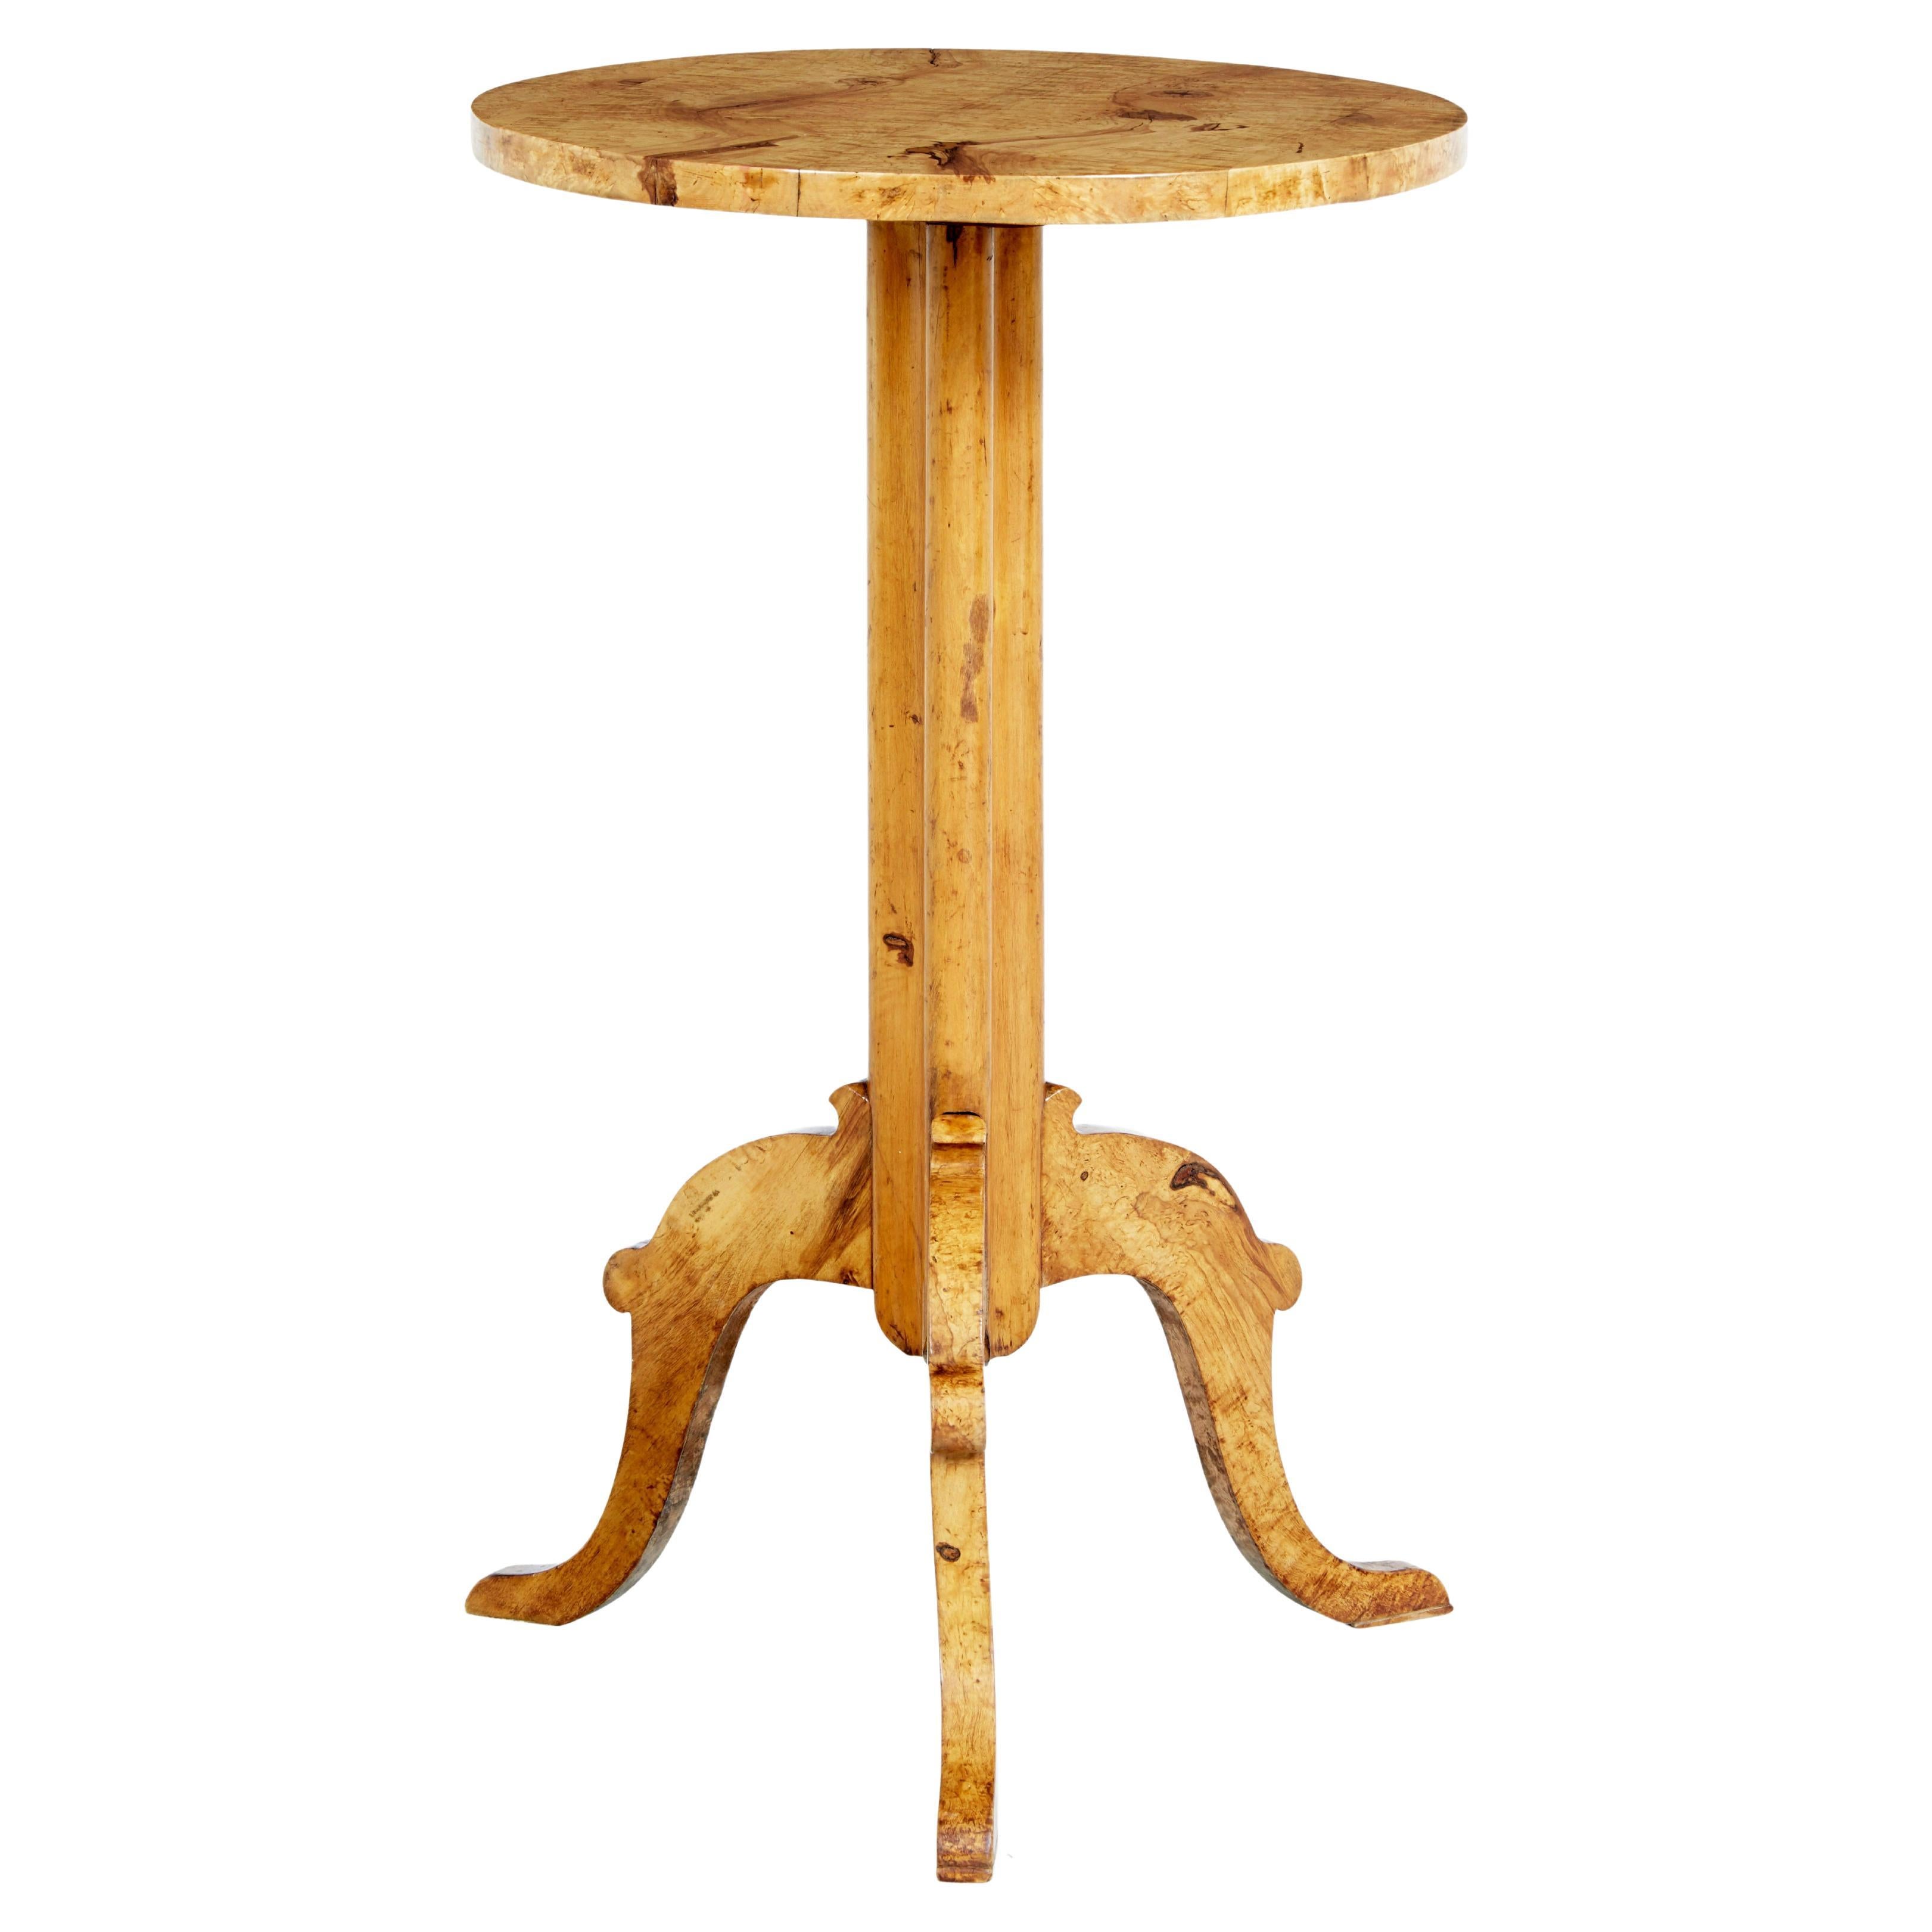 Mid 19th century birch root occasional table